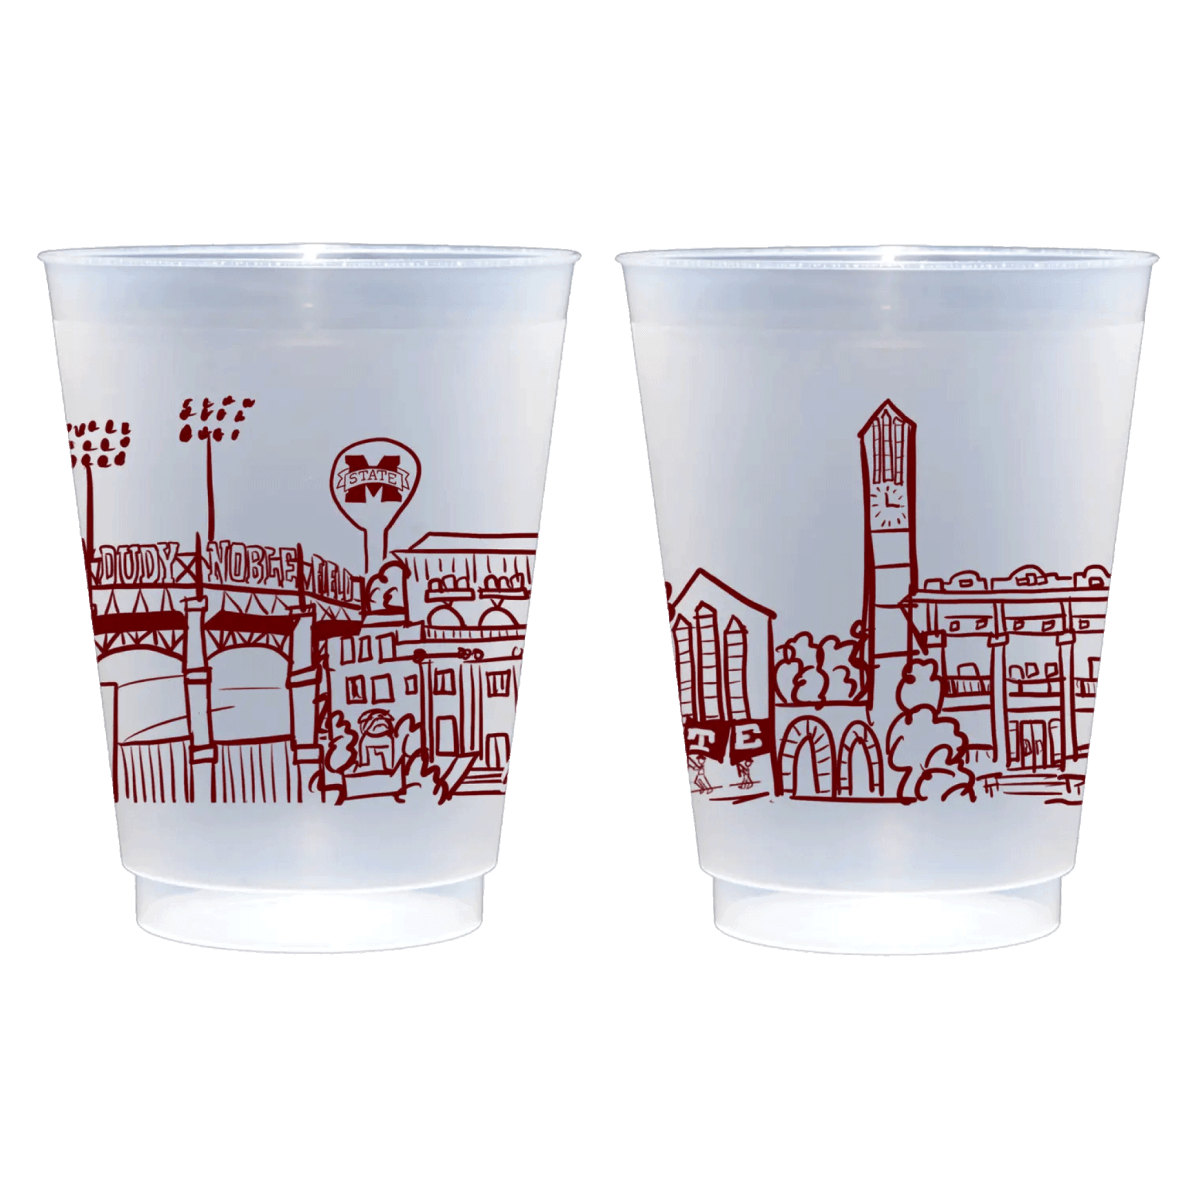 Mississippi State University Campus Cups - Shop B-Unlimited